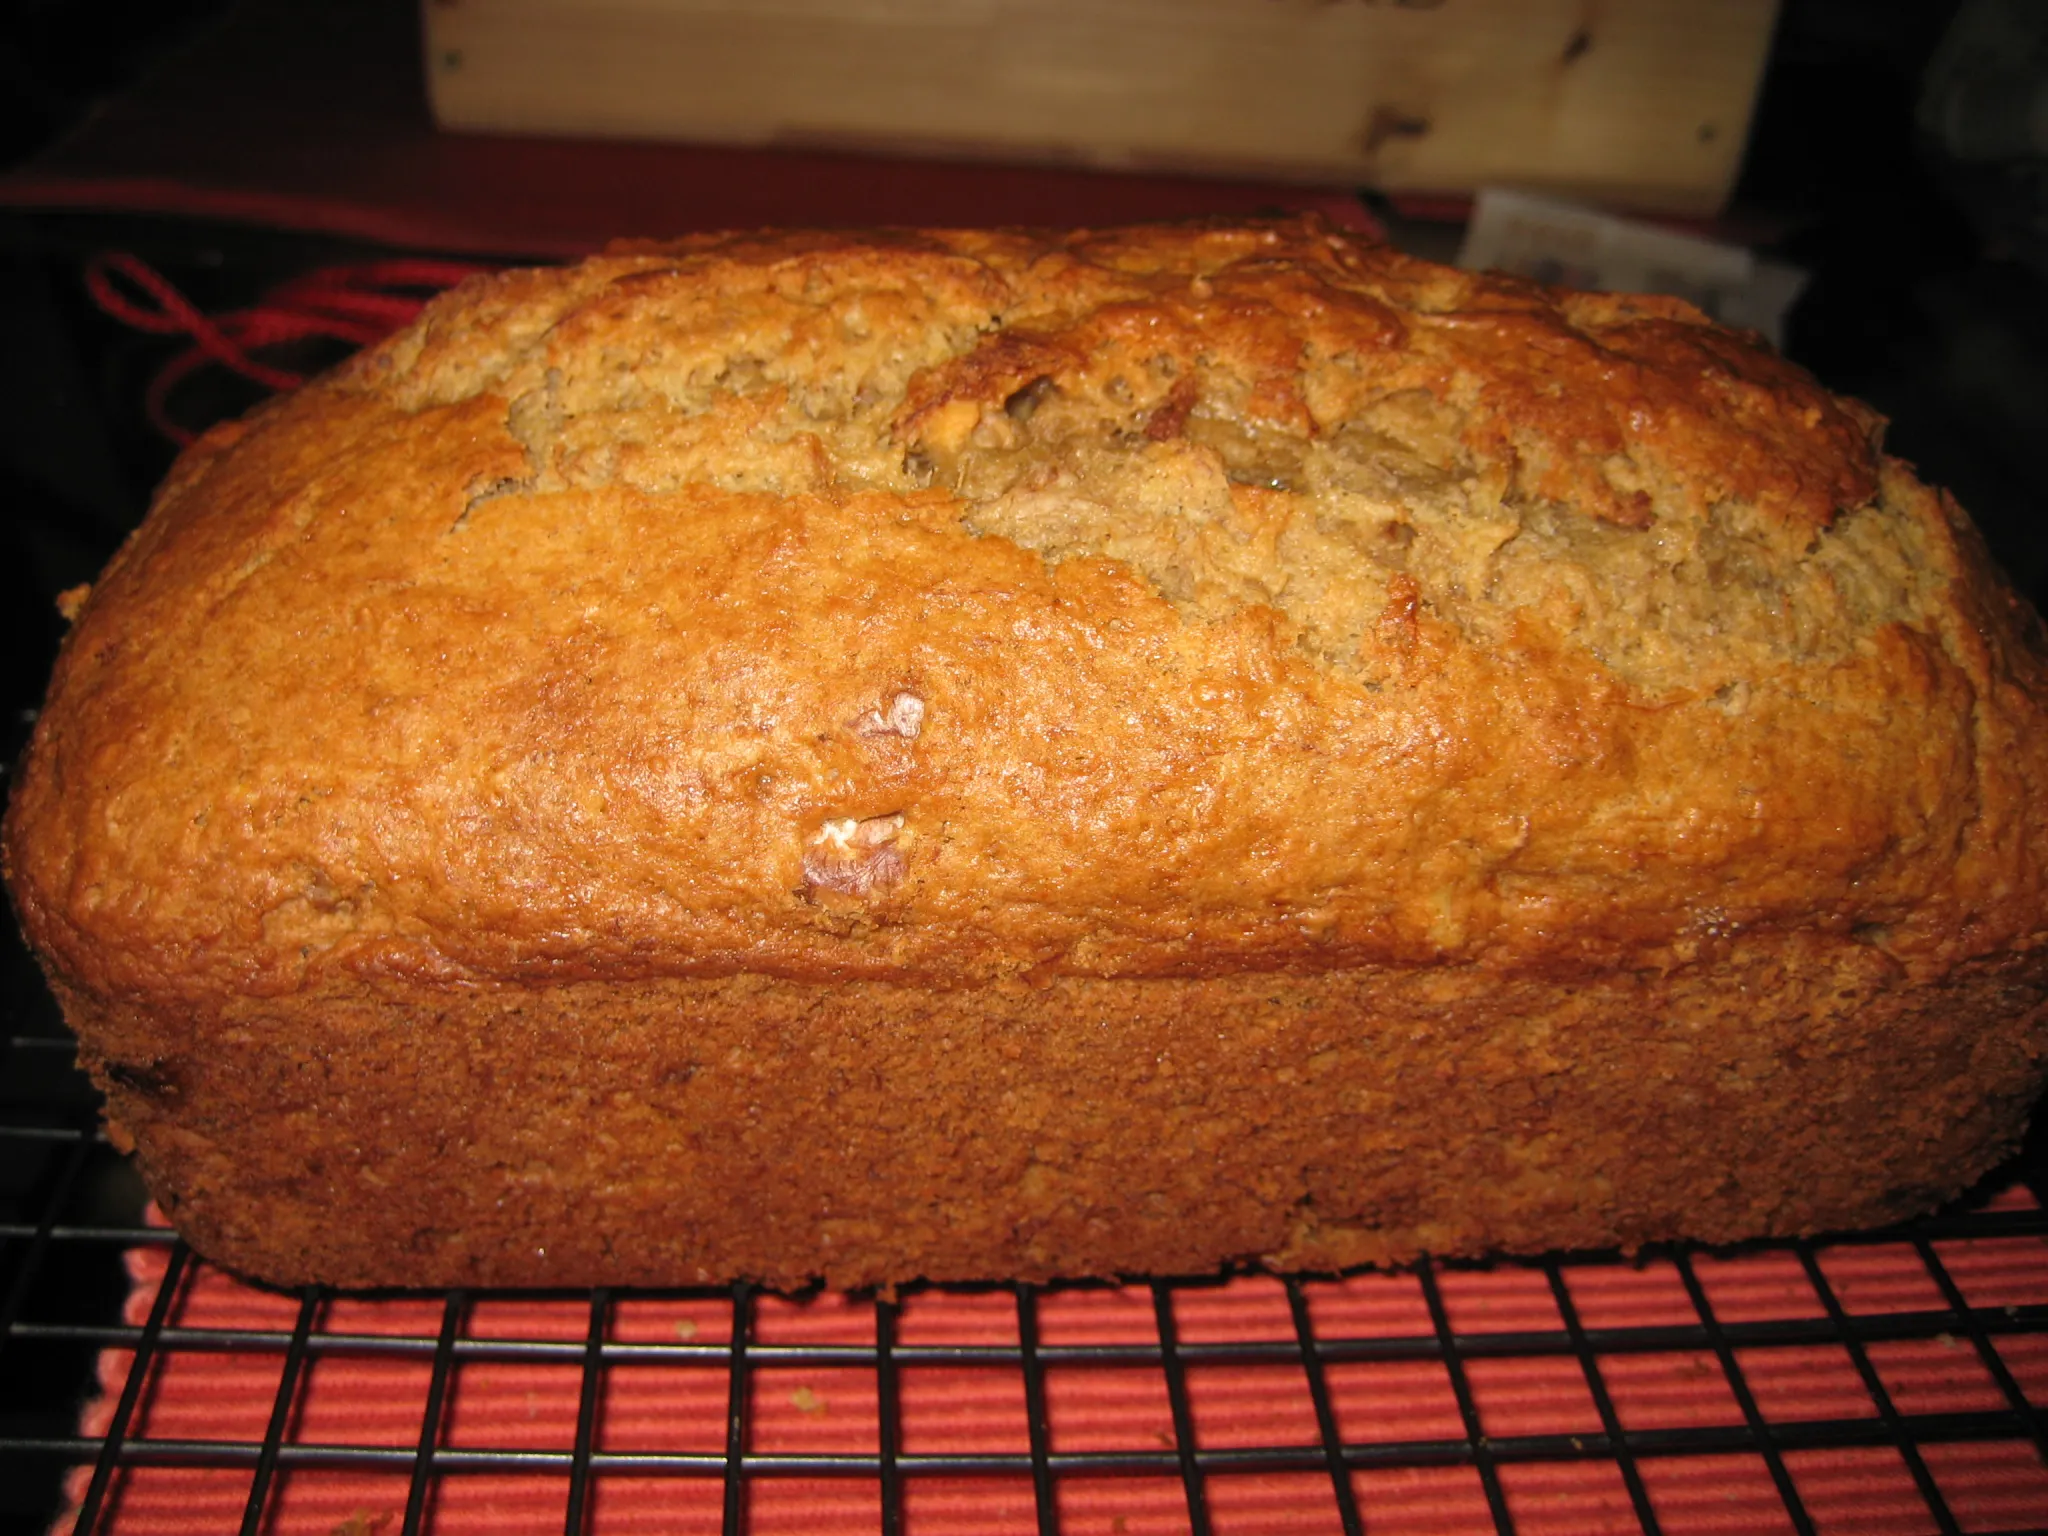 Delicious and Moist Banana Loaf Recipe with Self-Raising Flour